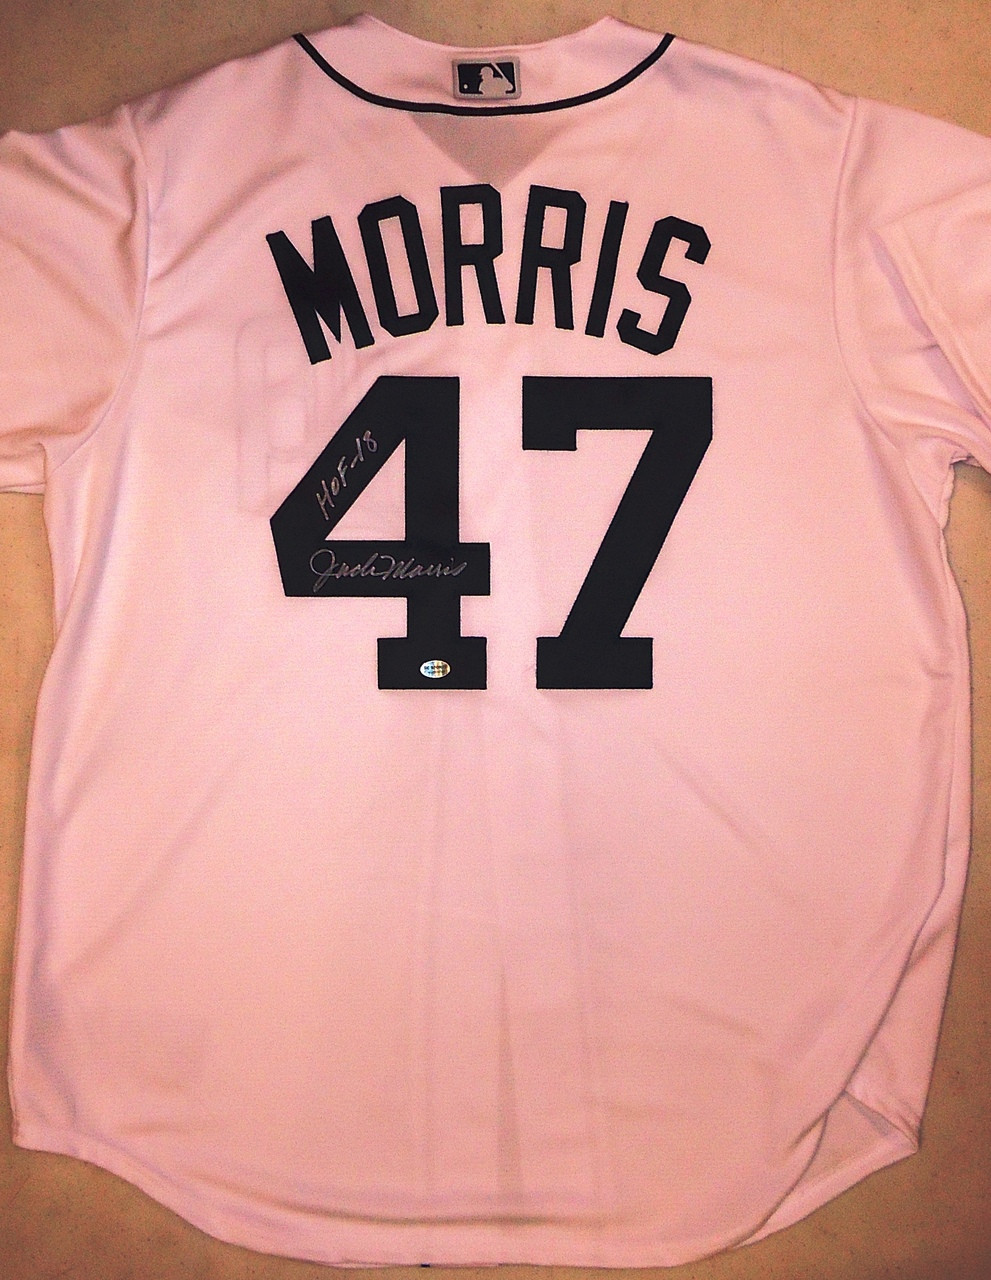 Jack Morris Autographed Detroit Tigers Nike Jersey Inscribed with